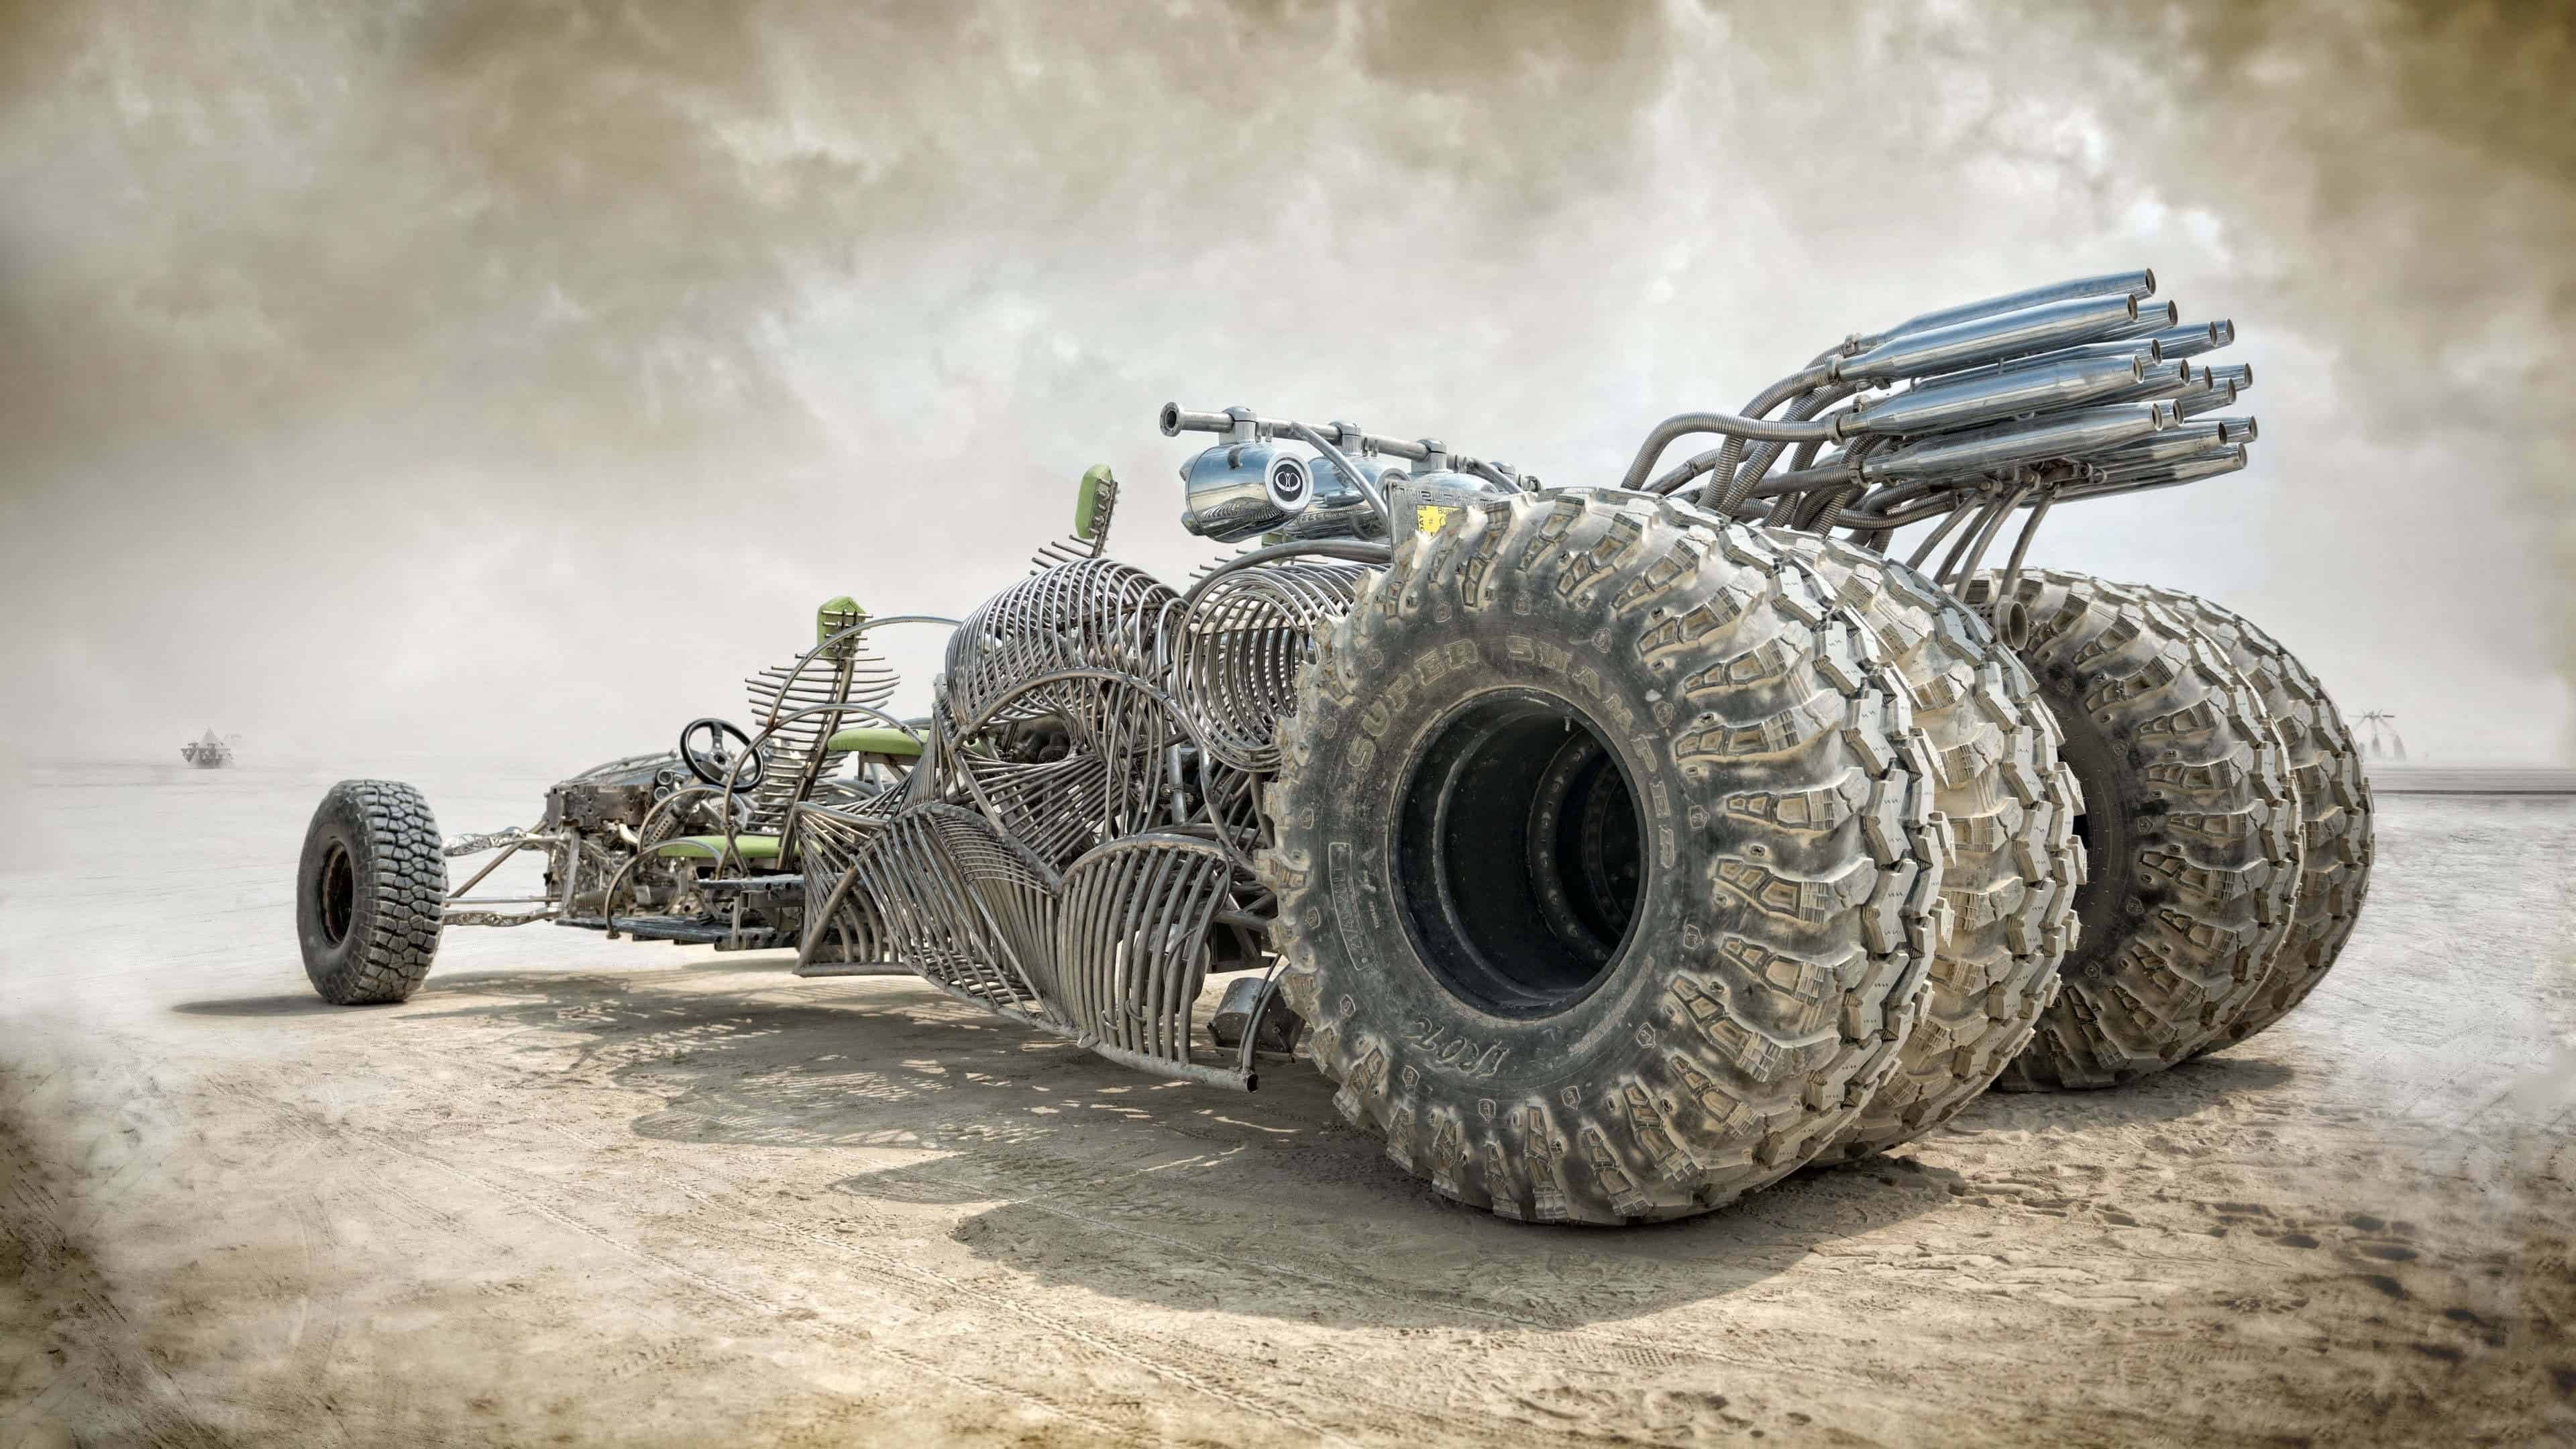 Mad Max: Fury Road: The fourth installment in the Mad Max franchise, Car. 3840x2160 4K Background.